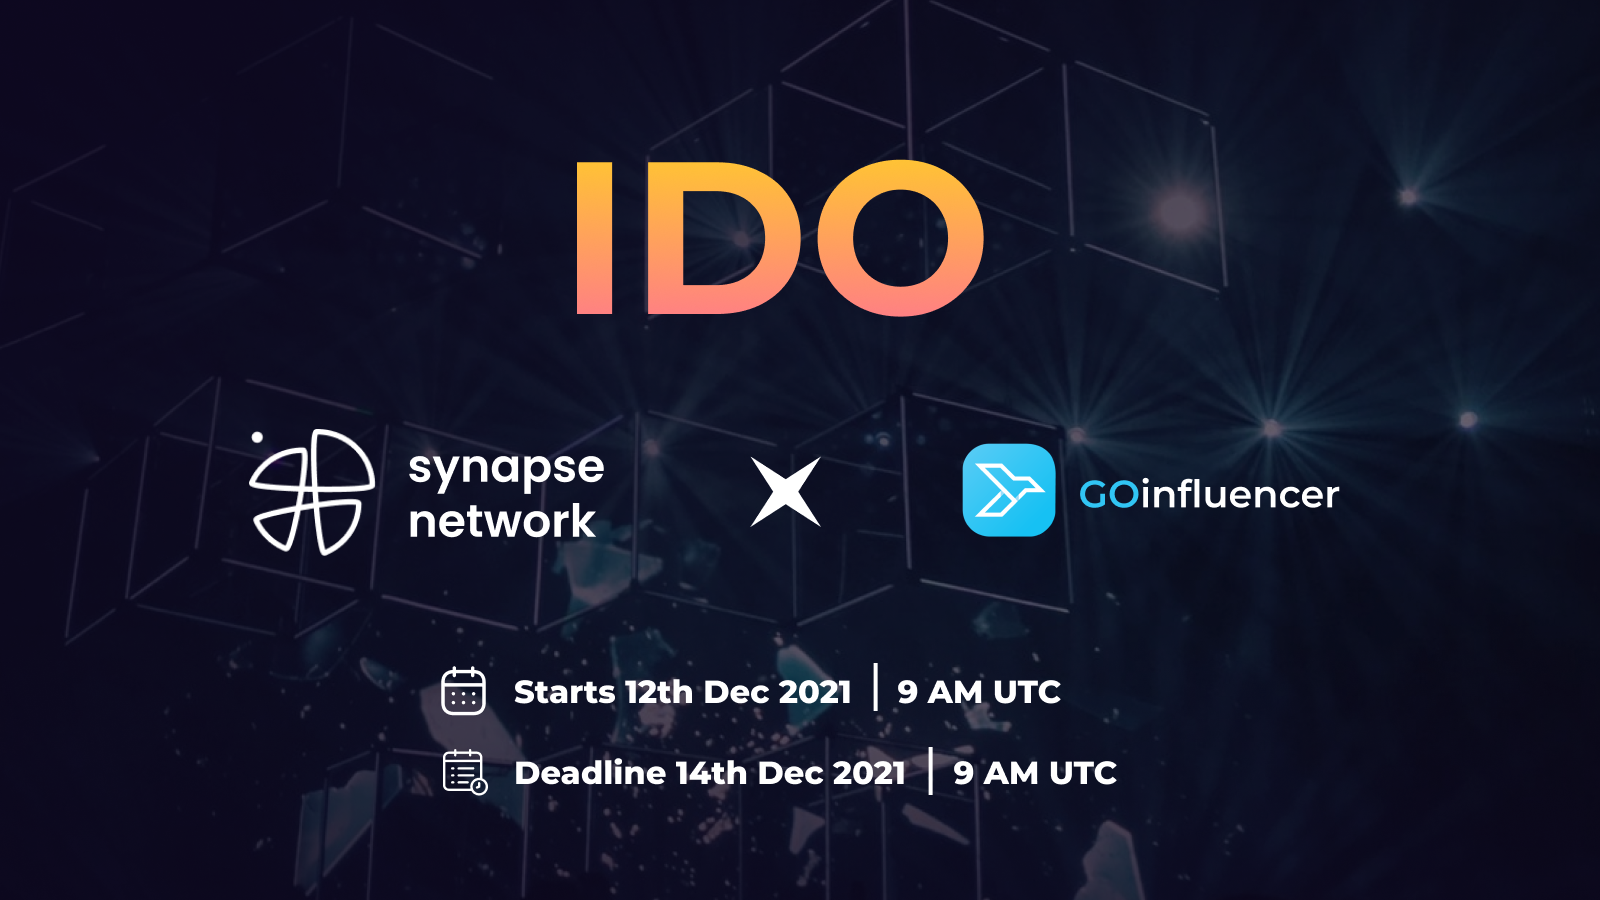 GOinfluencer announces its IDO on Synapse Network on December 12th!